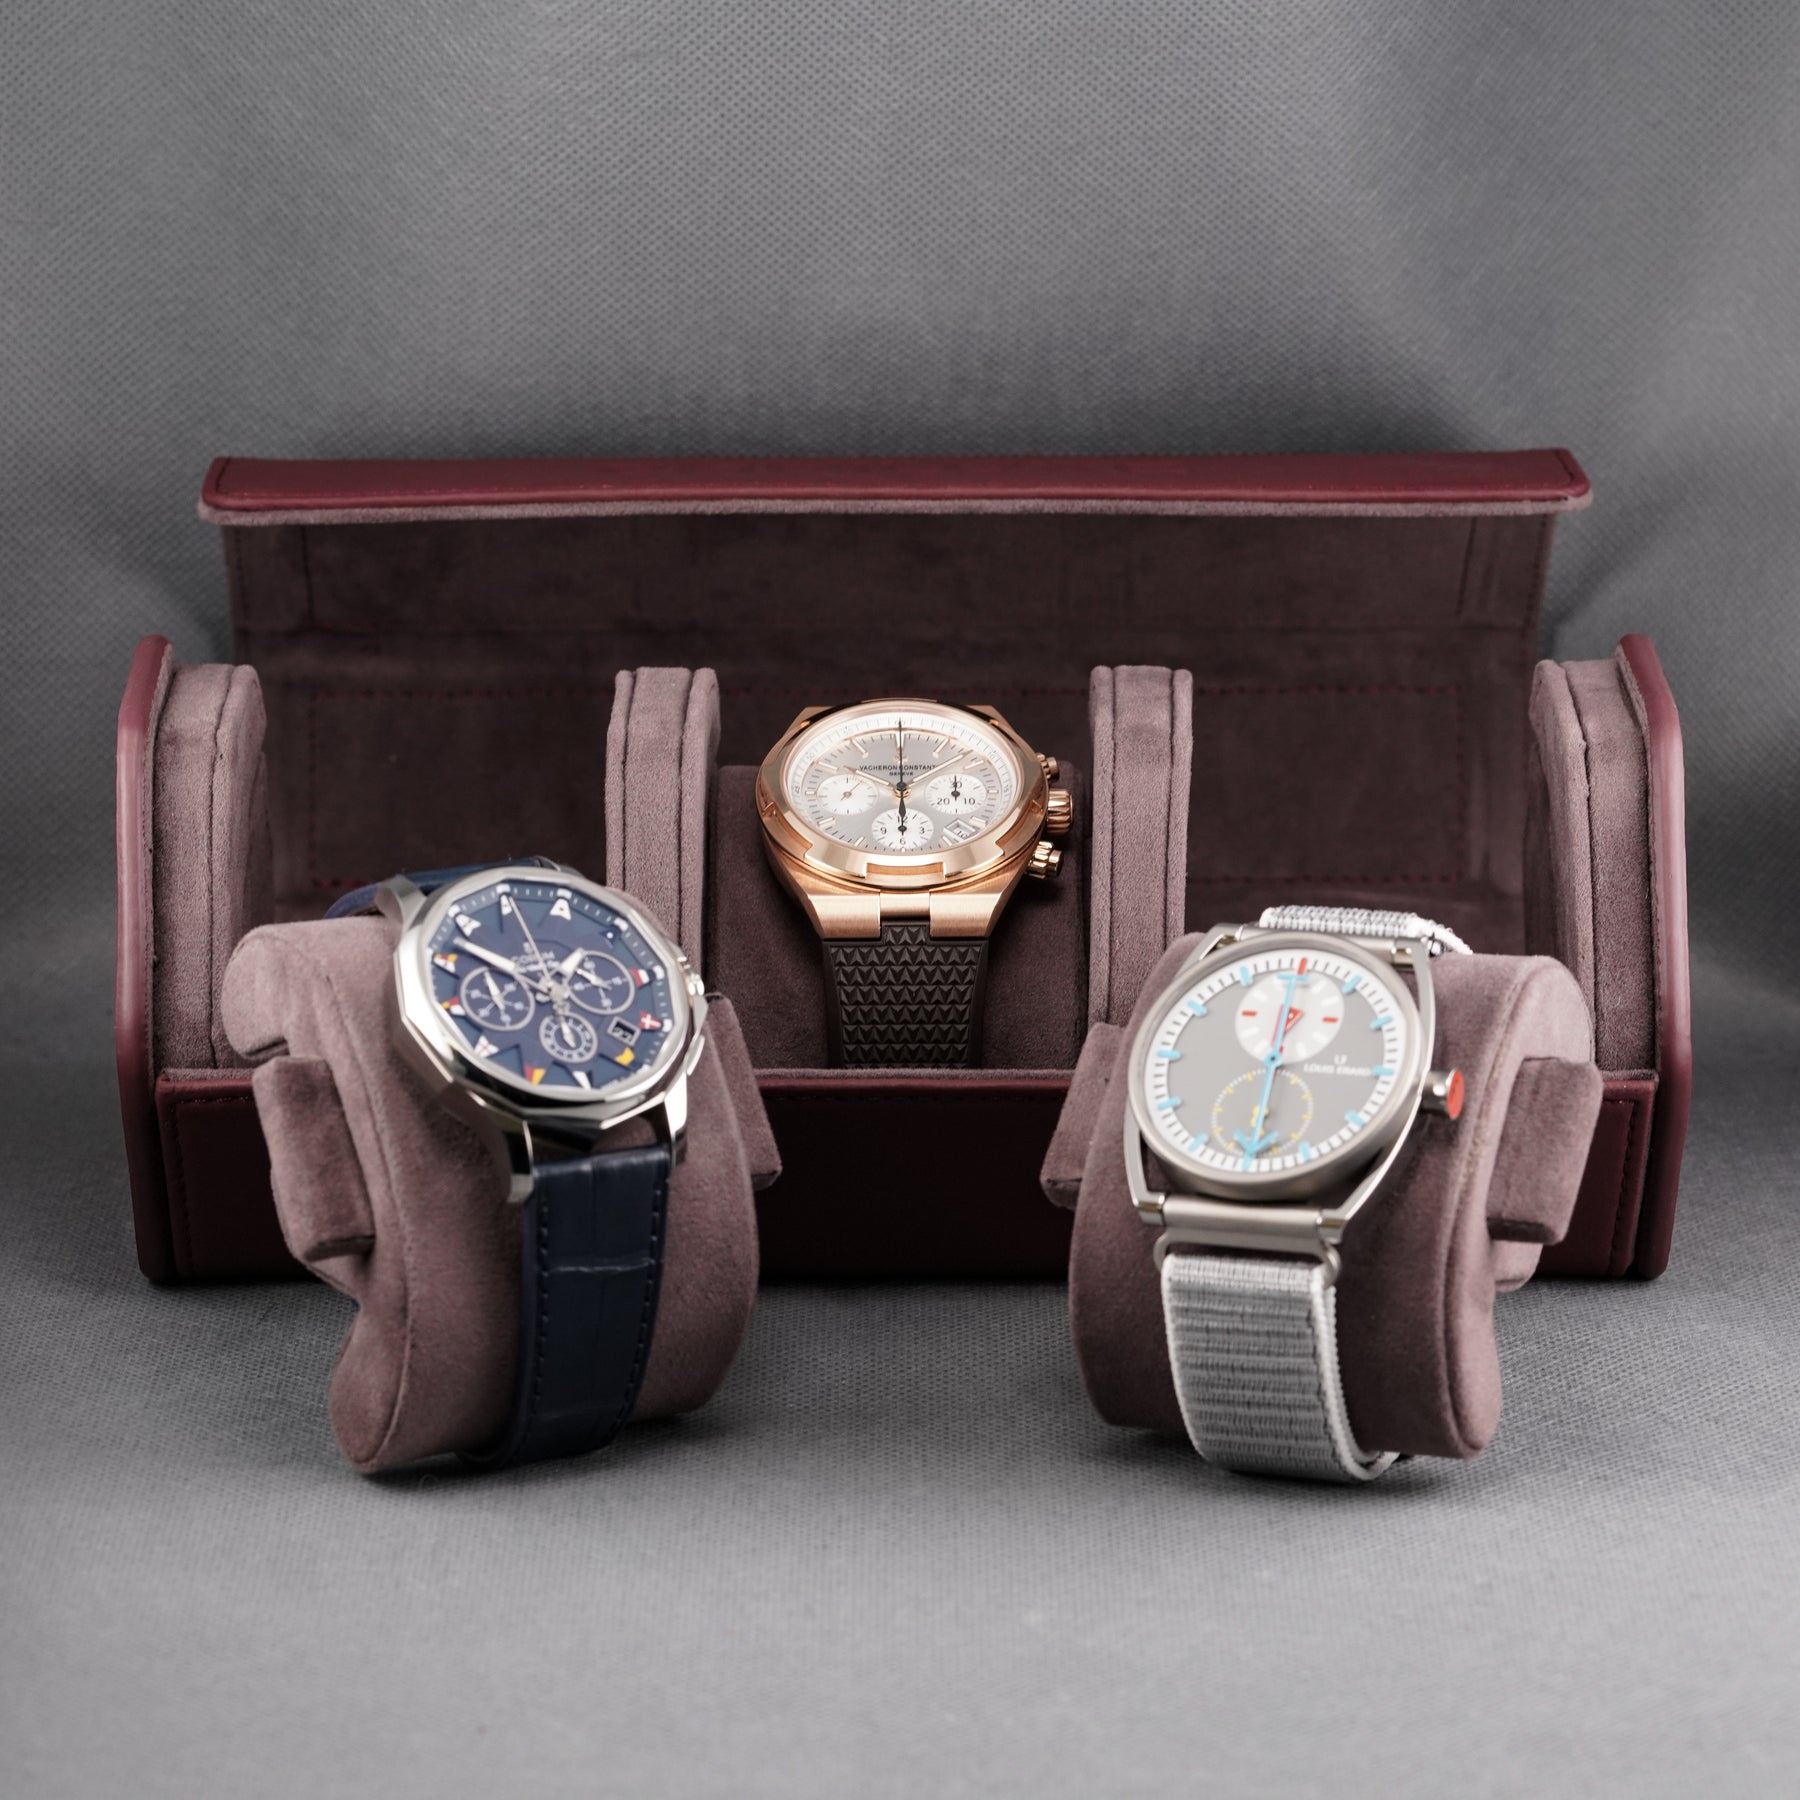 SIGNATURE OMNILUXE WATCH TRAVEL CASE - TRIPLE SLOTS